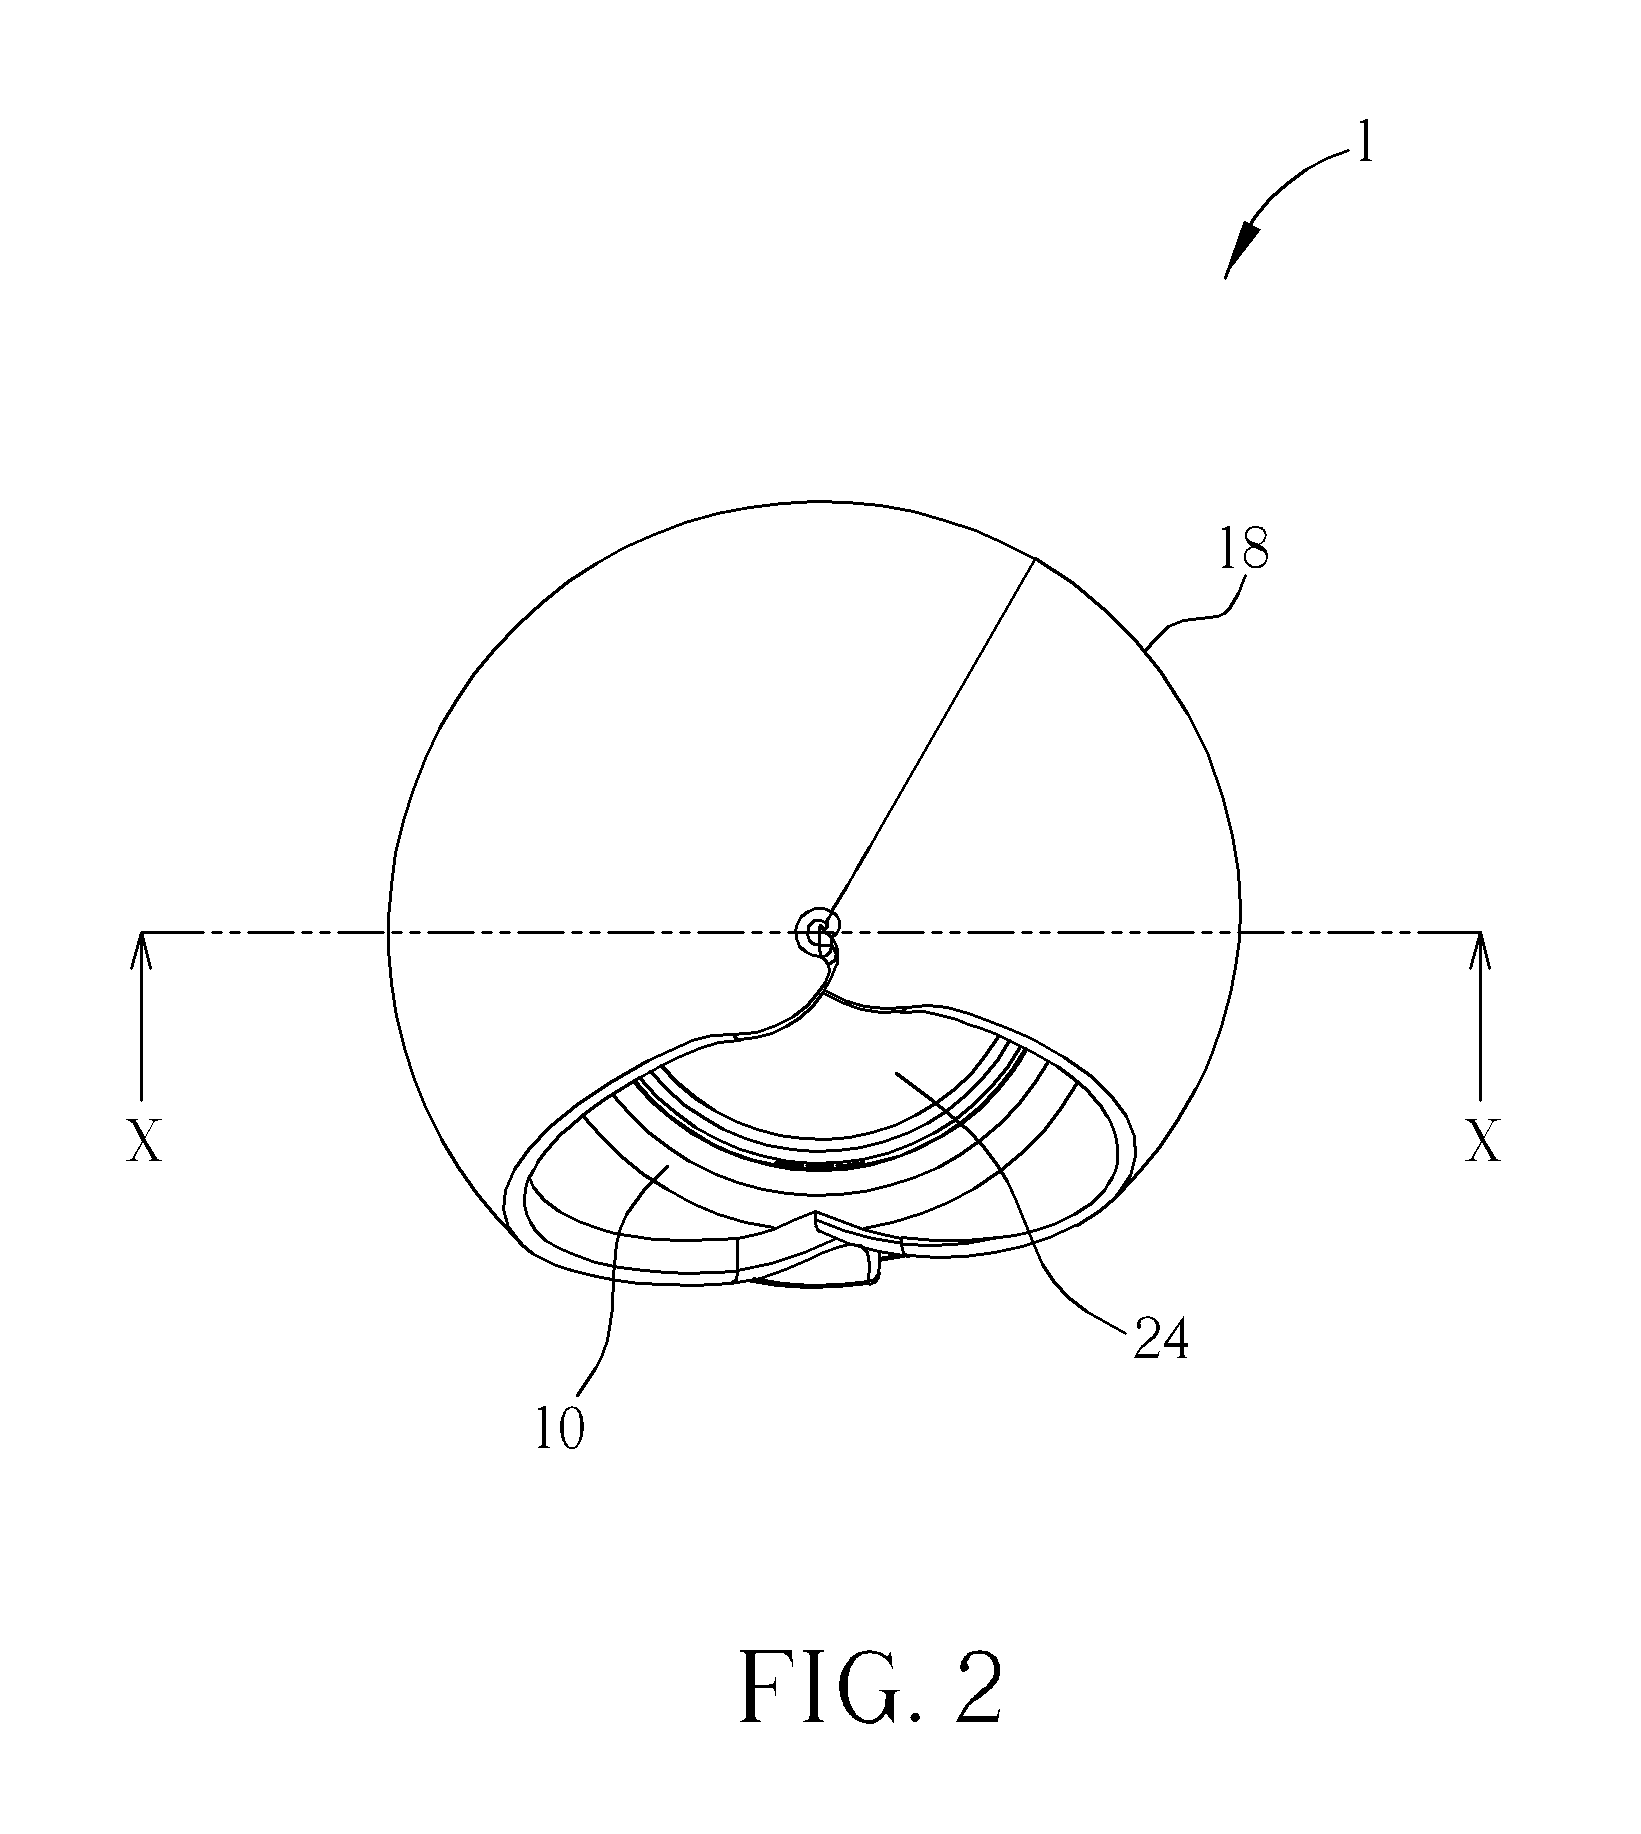 Illumination device capable of being controlled by blow